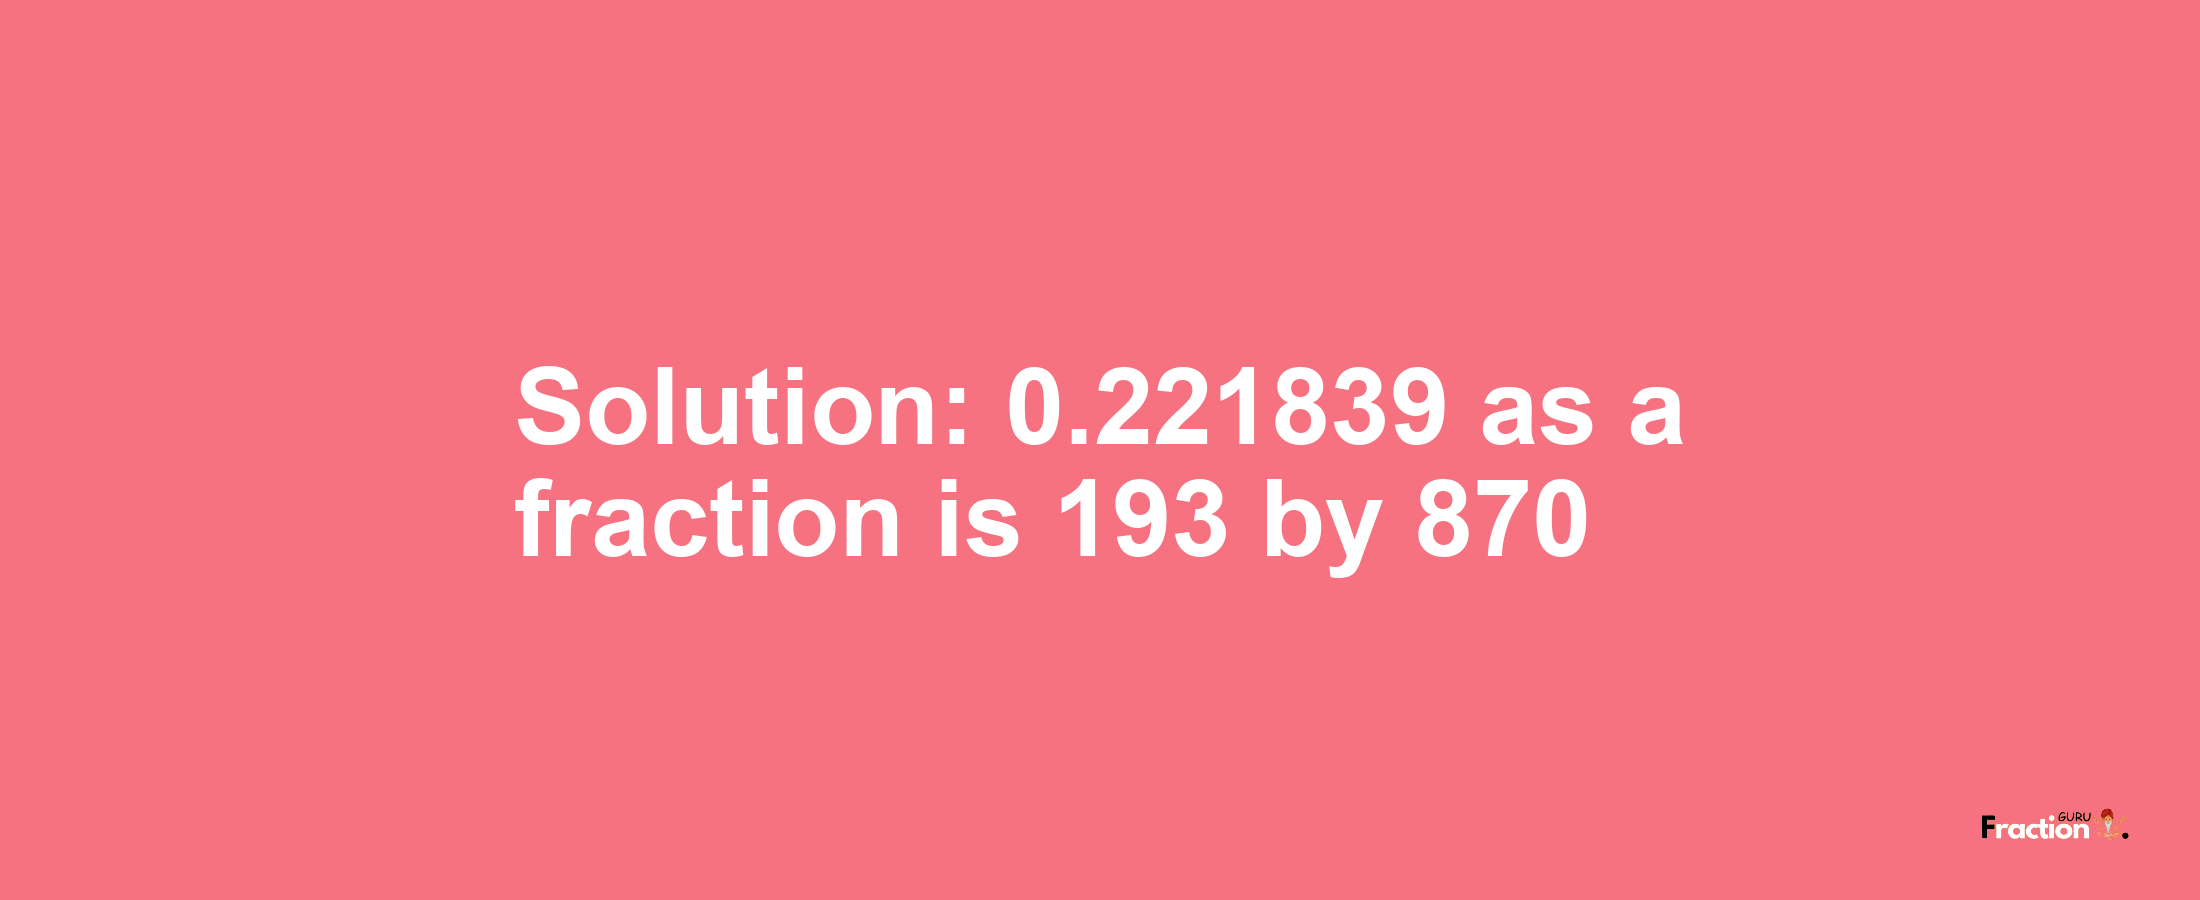 Solution:0.221839 as a fraction is 193/870